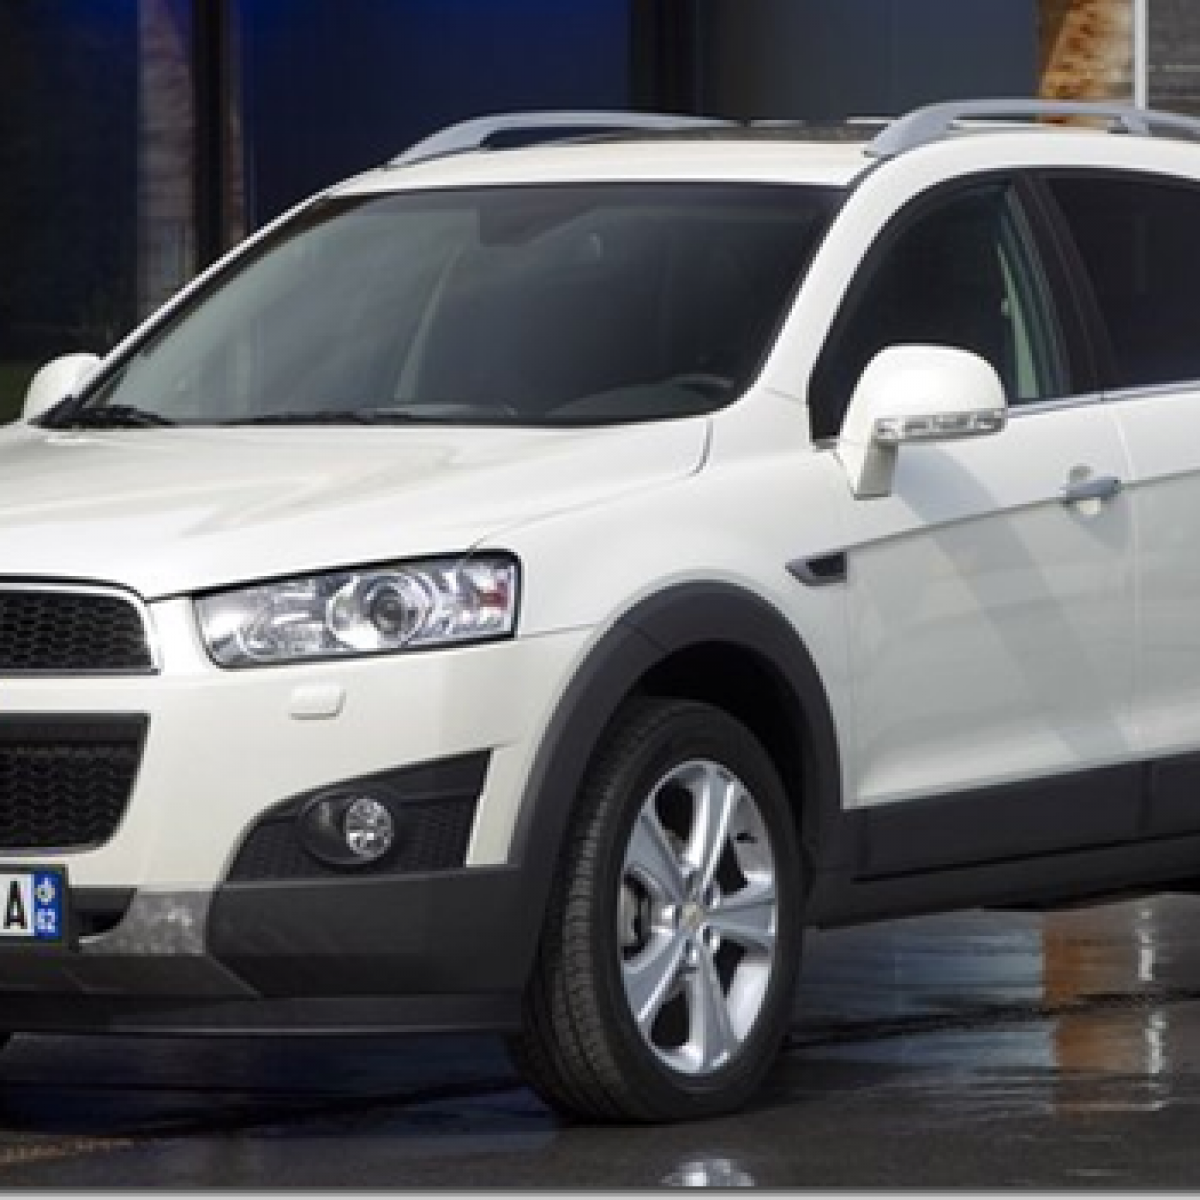 Chevy Captiva Pricing - Cars